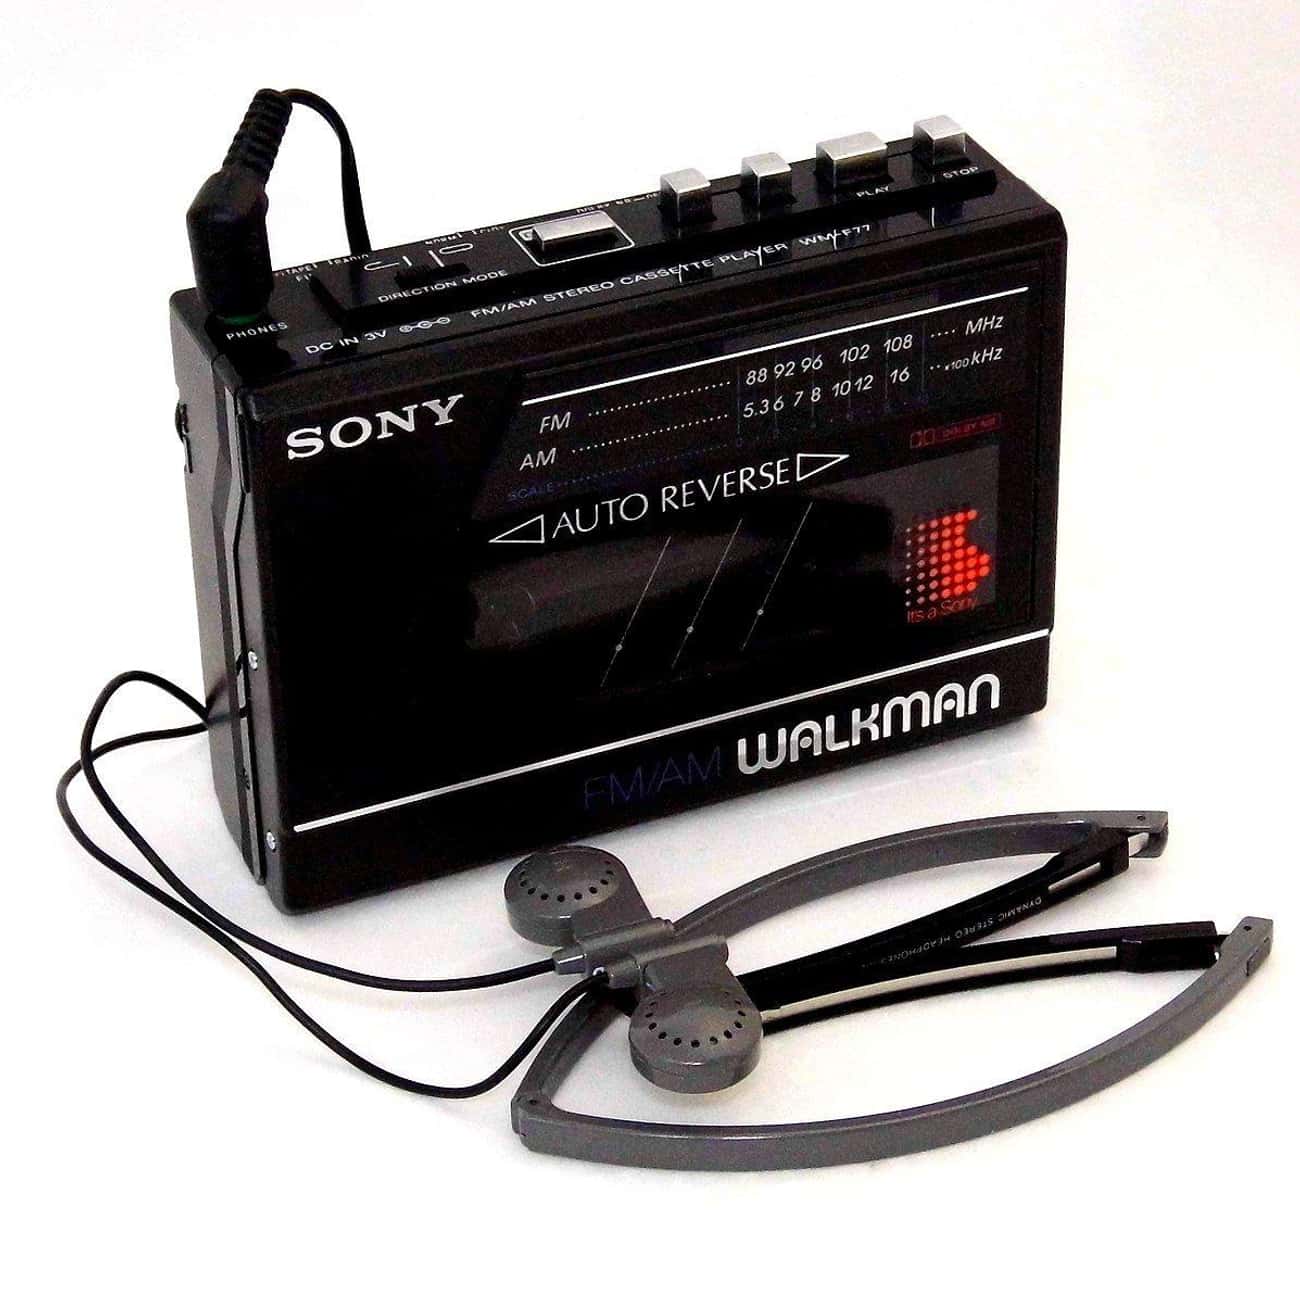 The Success Of The Walkman Made Cassettes More Popular Than Vinyl Records (In 1983)